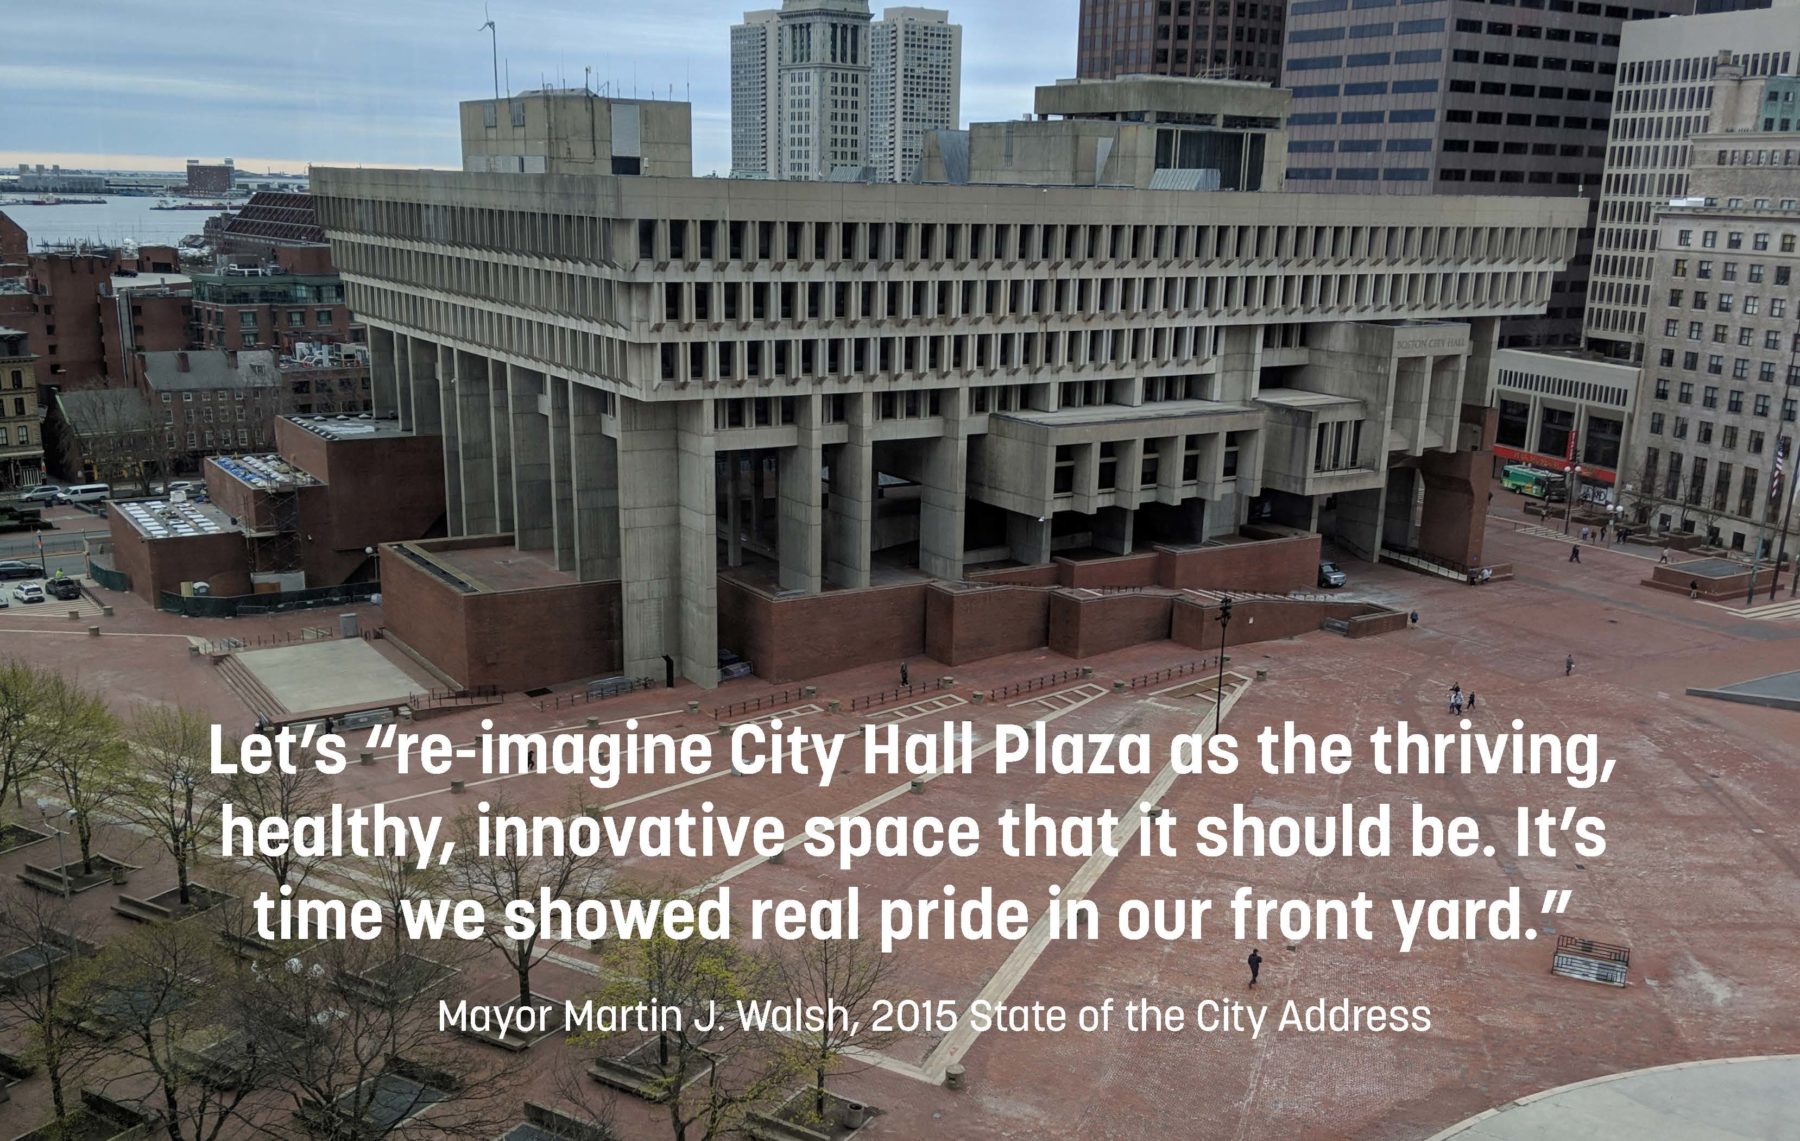 Image of Boston City Hall Plaza with text over it that reads: Let's reimagine City Hall Plaza as the thriving, healthy, innovative space that it should be. It's time we showed real pride in our front yard. The quote is from Mayor Martin J. Walsh's 2015 State of the City address